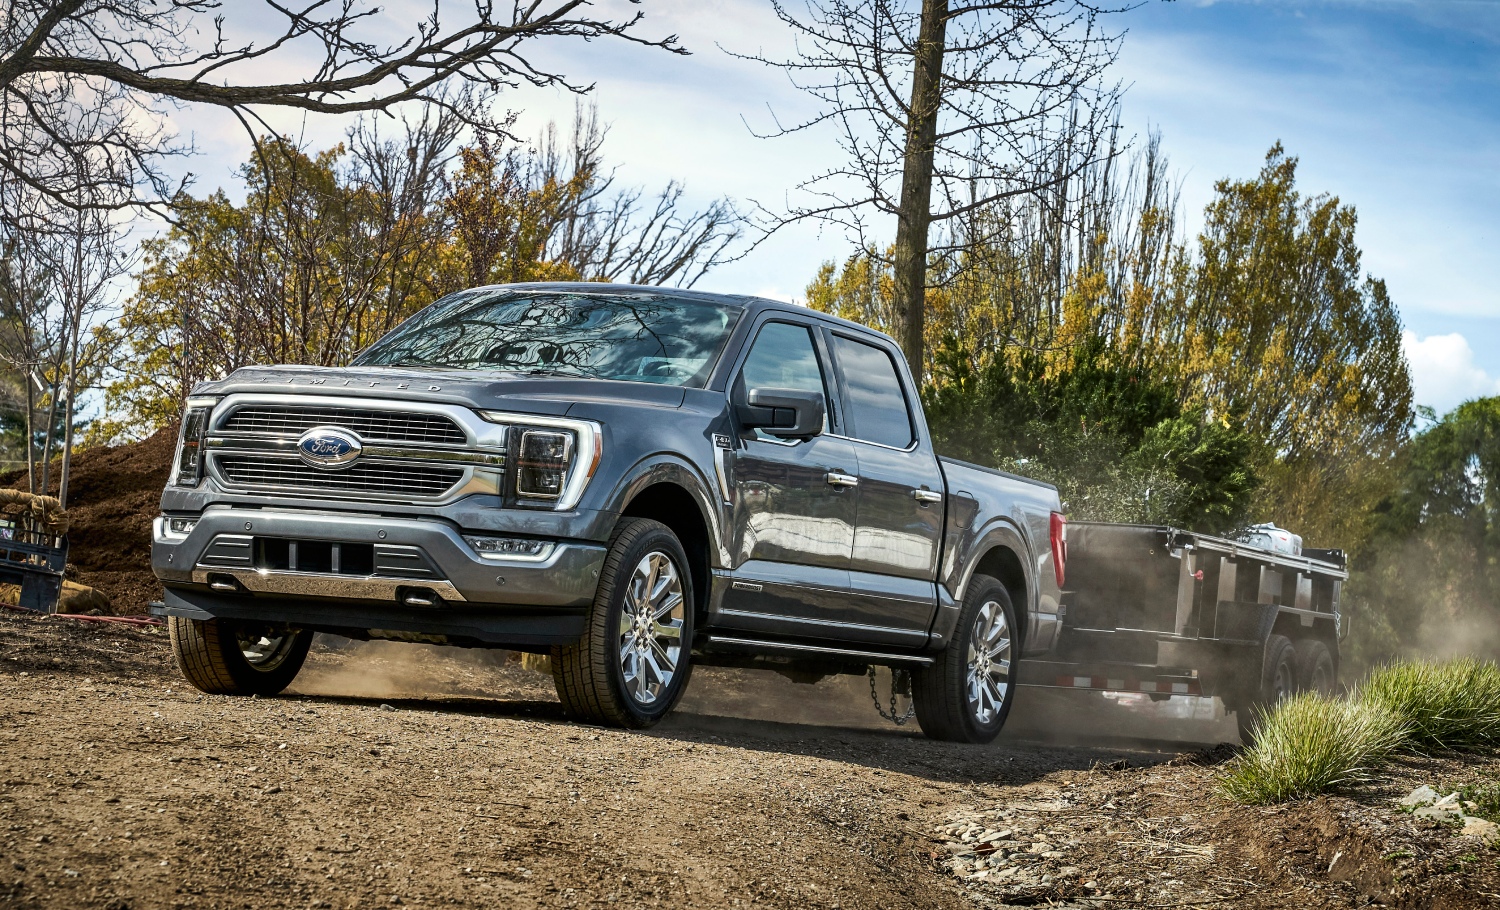 The best full-size pickup trucks include the 2022 Ford F-150